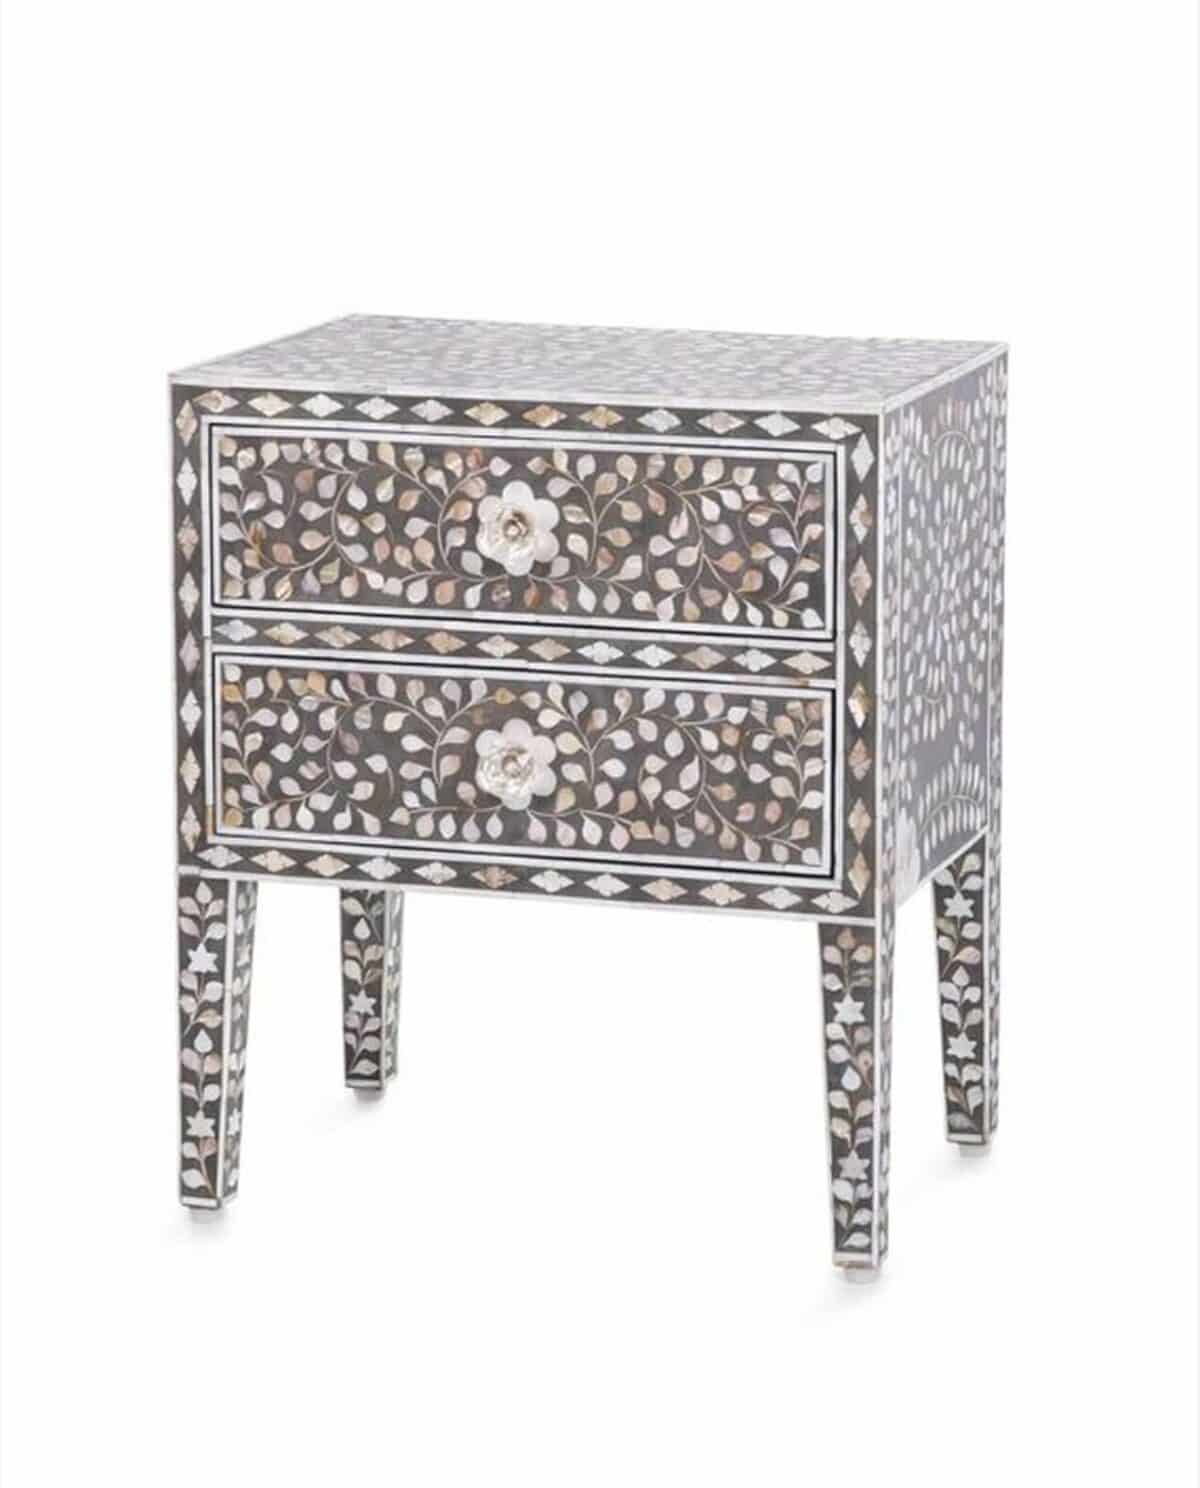 Pearl Inlay Floral 2 Drawer Bedside